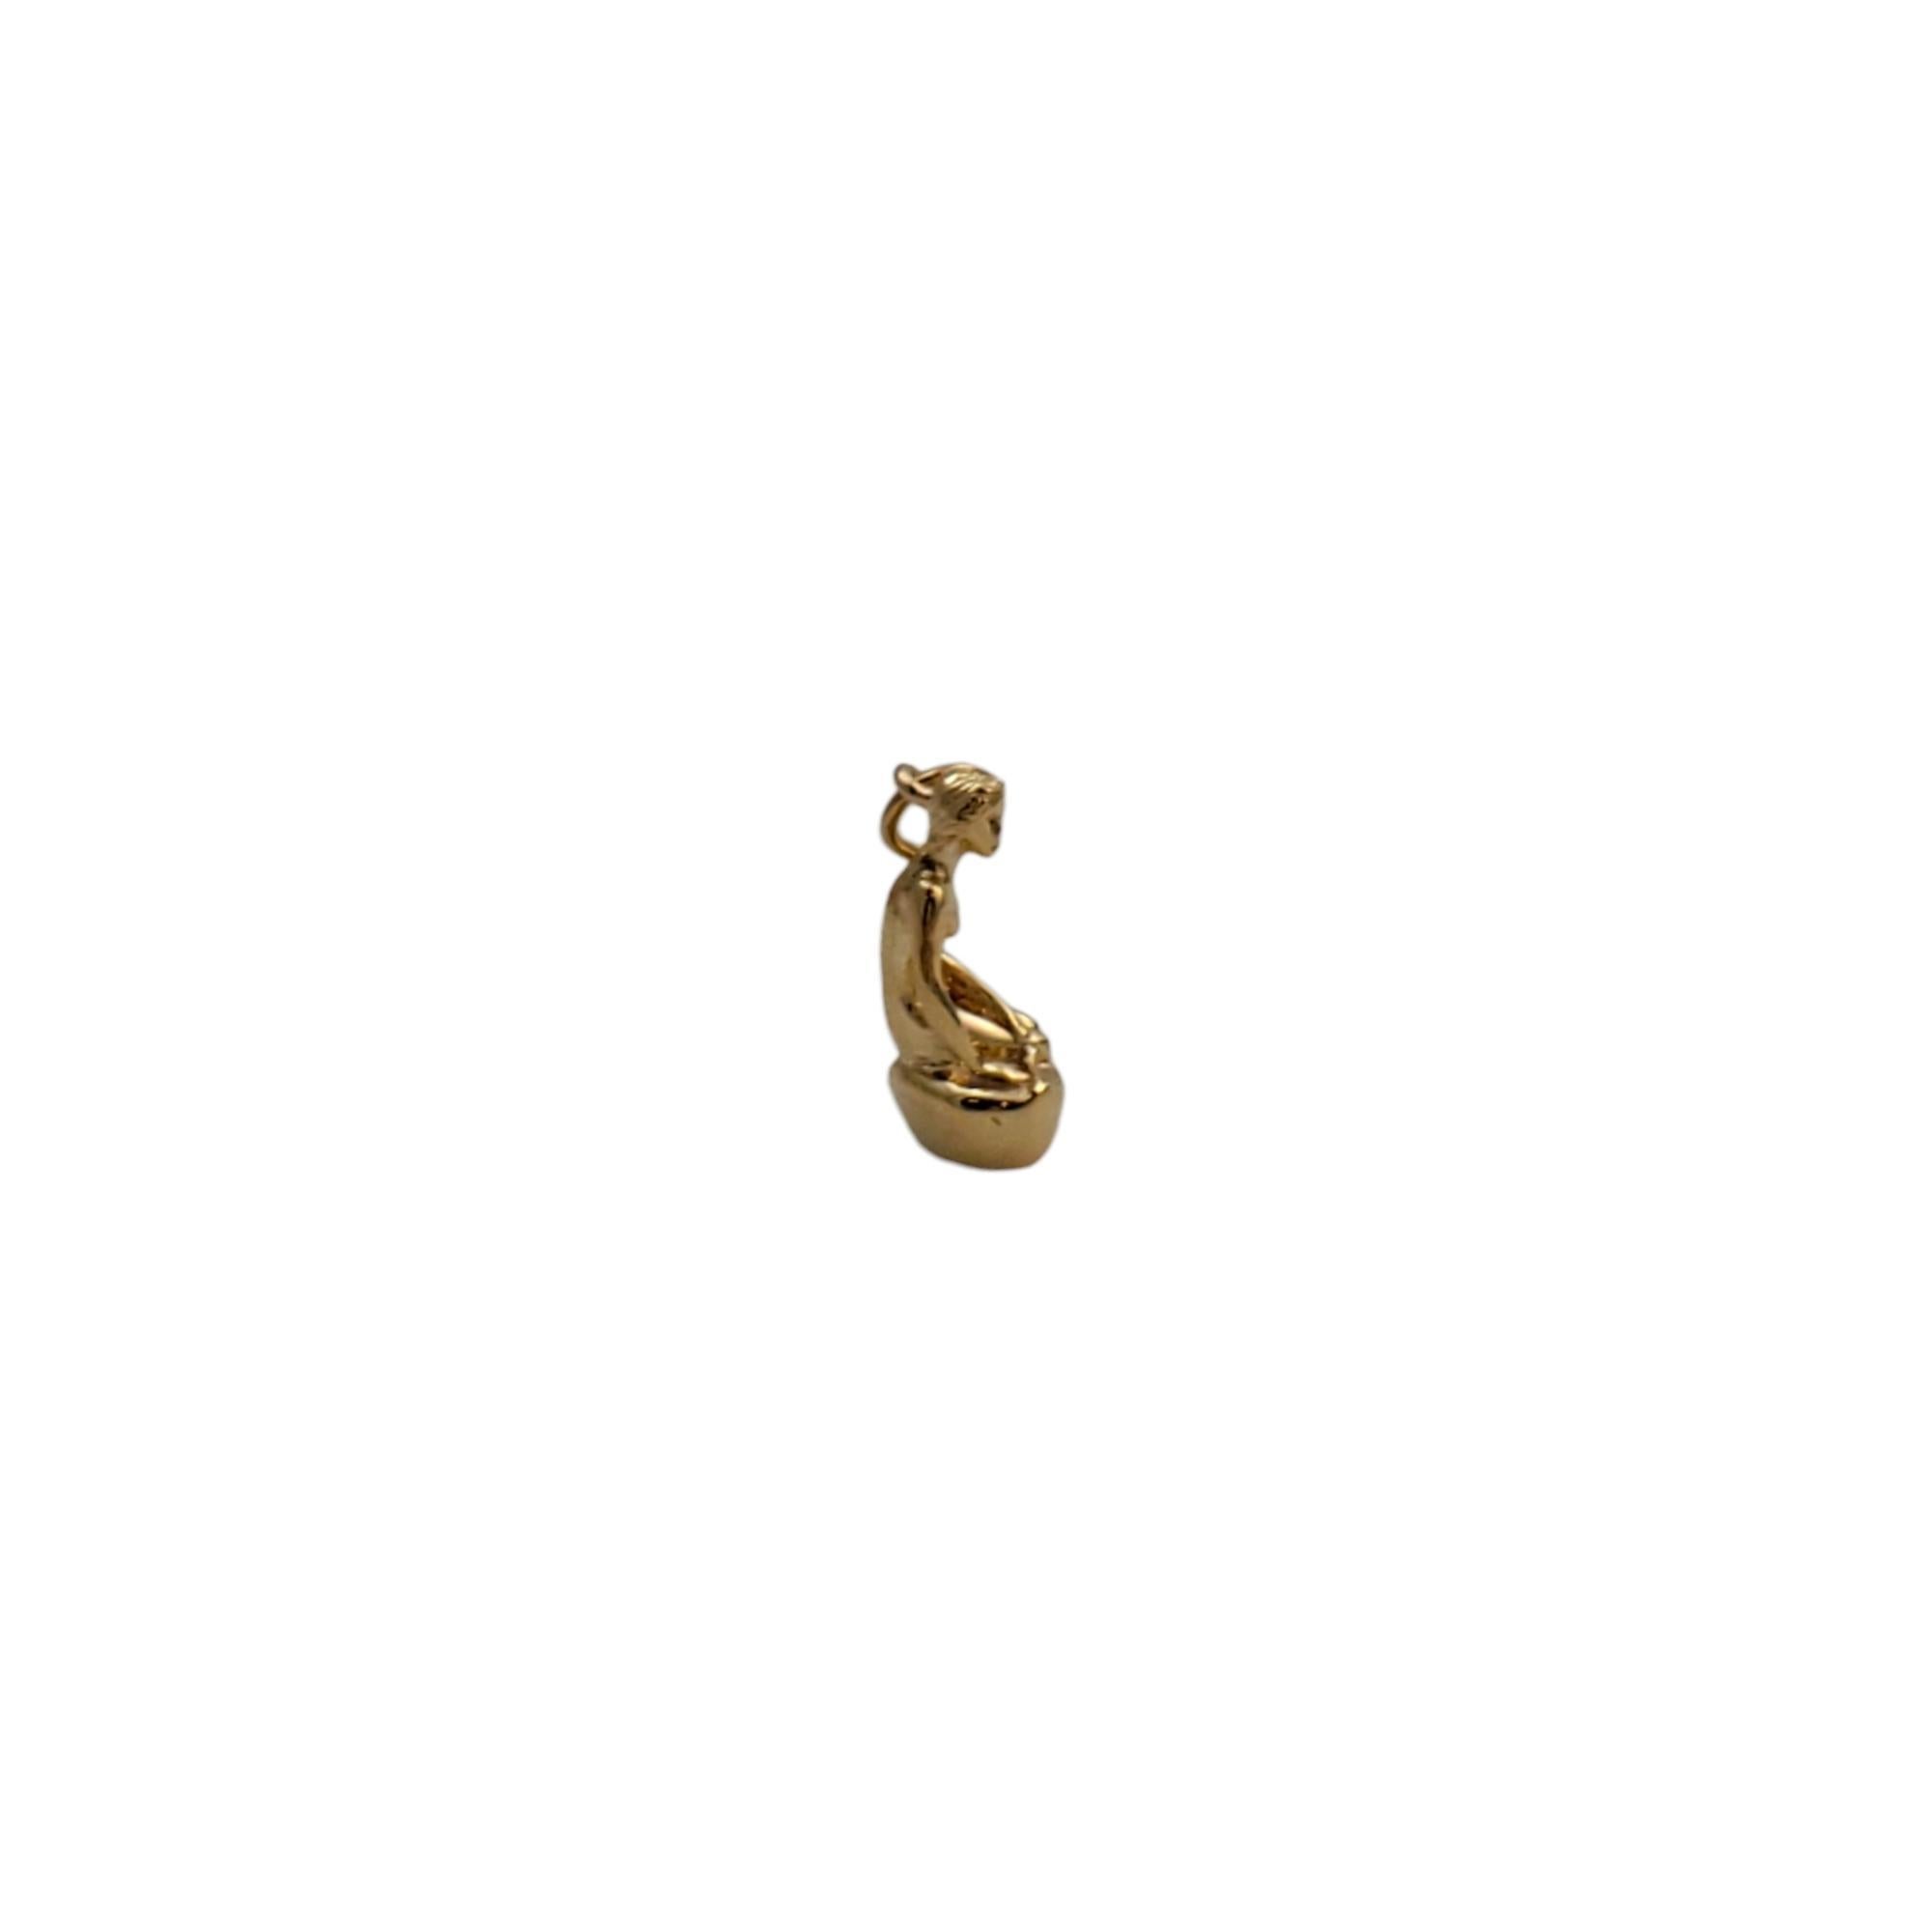 Vintage 14 karat yellow gold Denmark mermaid pendant -

Dive into enchantment with this Denmark mermaid charm that is set in beautifully detailed 14K yellow gold.

Size: 12.52mm x 20.71mm

Stamped: 14K BH 585 Denmark

Weight: 6.48 gr./ 4.17